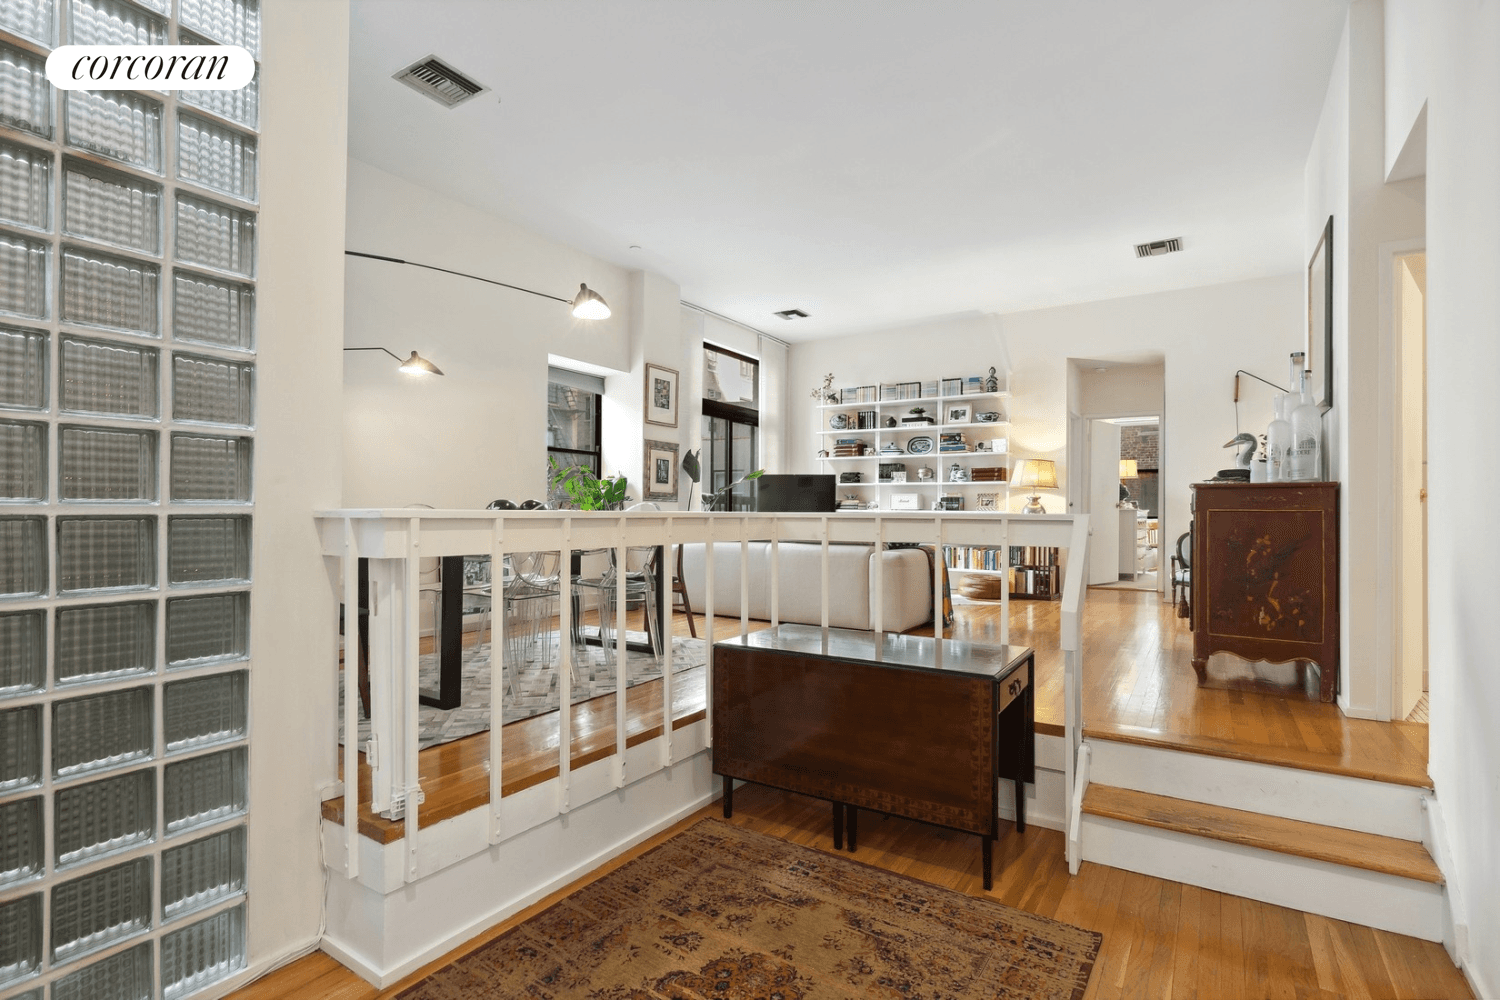 This stunning two bedroom, two full bath condo in the historic Level Club boasts modern updates to the kitchen and bathrooms, a beautiful step up living room with hardwood floors, ...